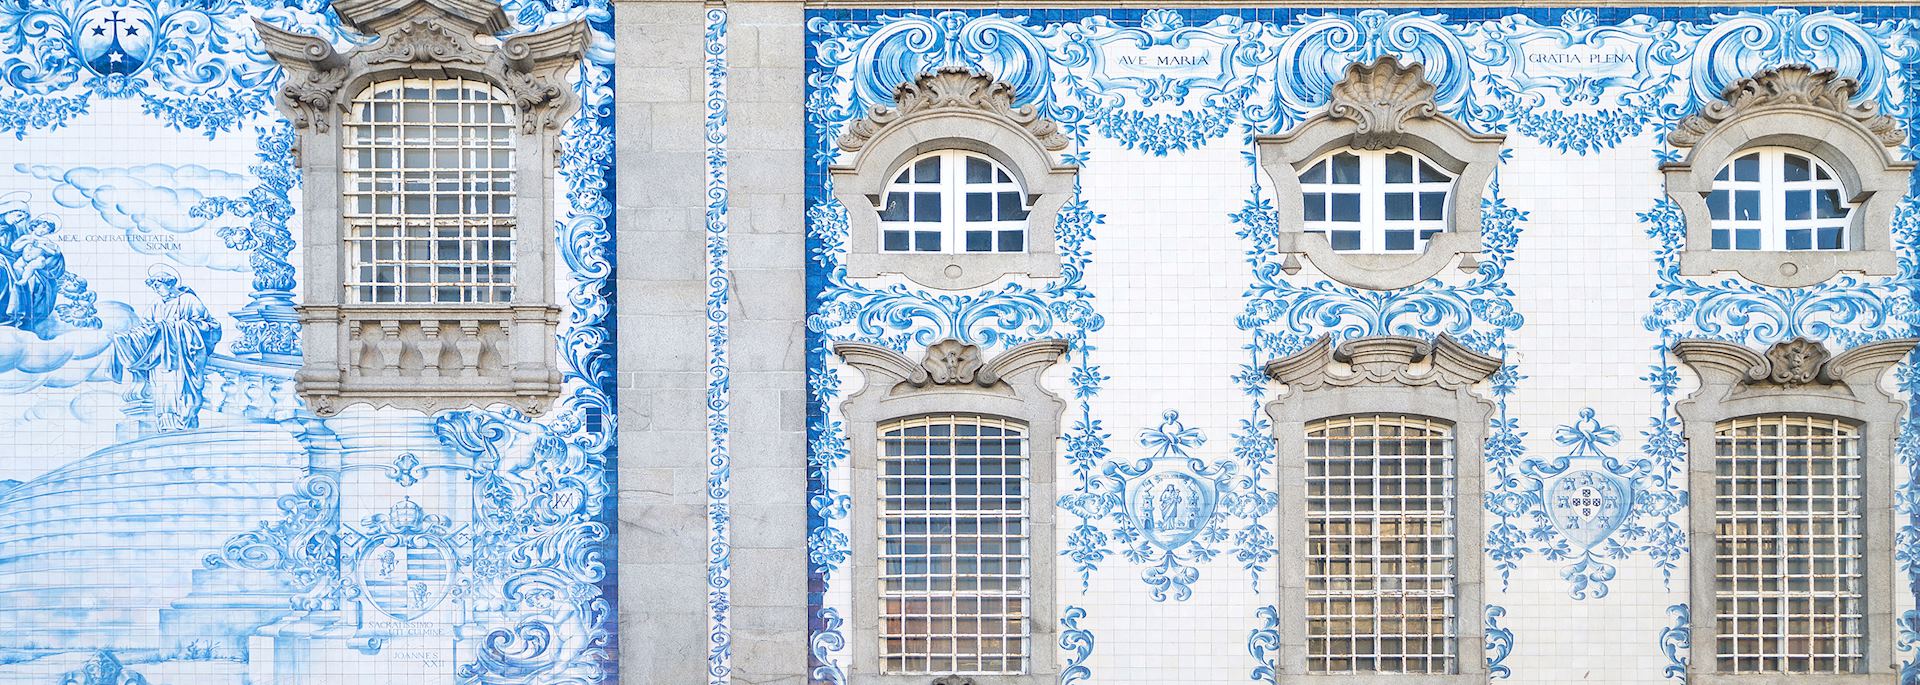 Traditional tiled church, central Porto